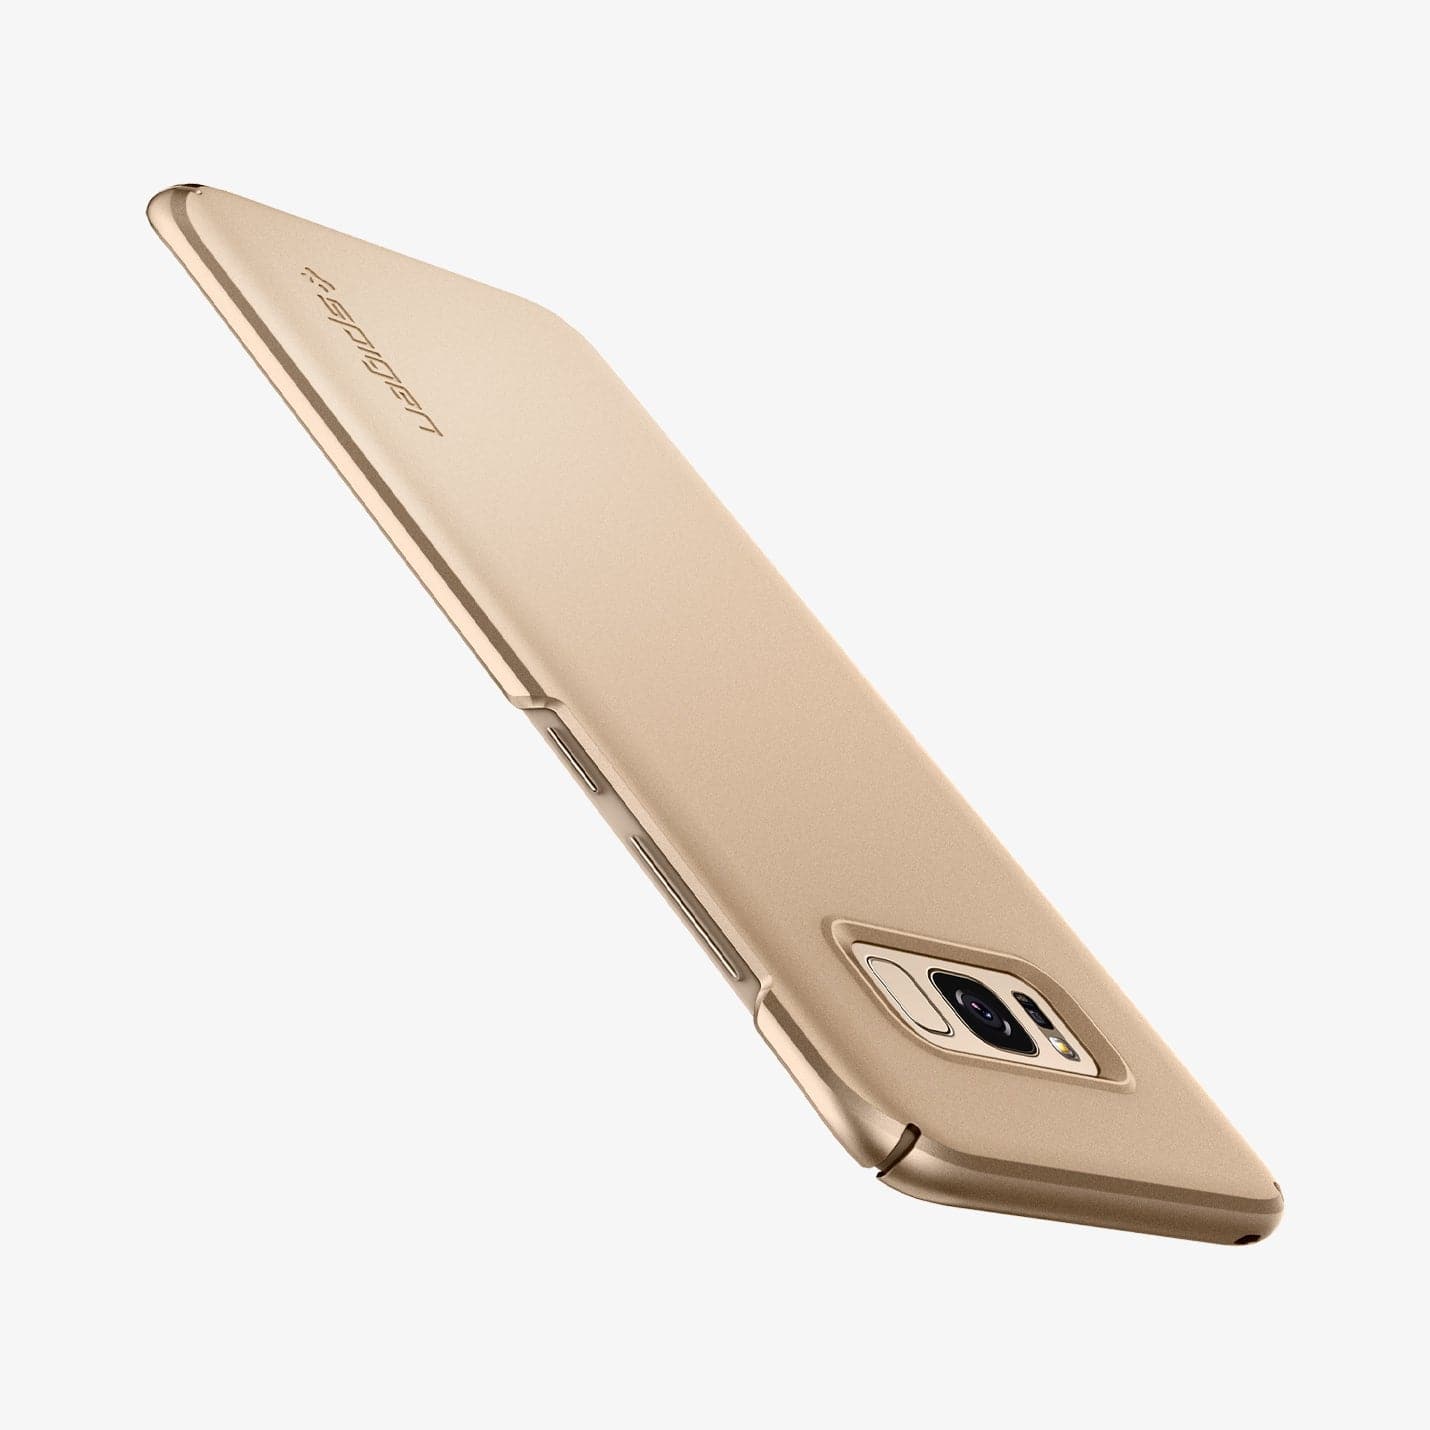 565CS21622 - Galaxy S8 Series Thin Fit Case in maple gold showing the side, top and back